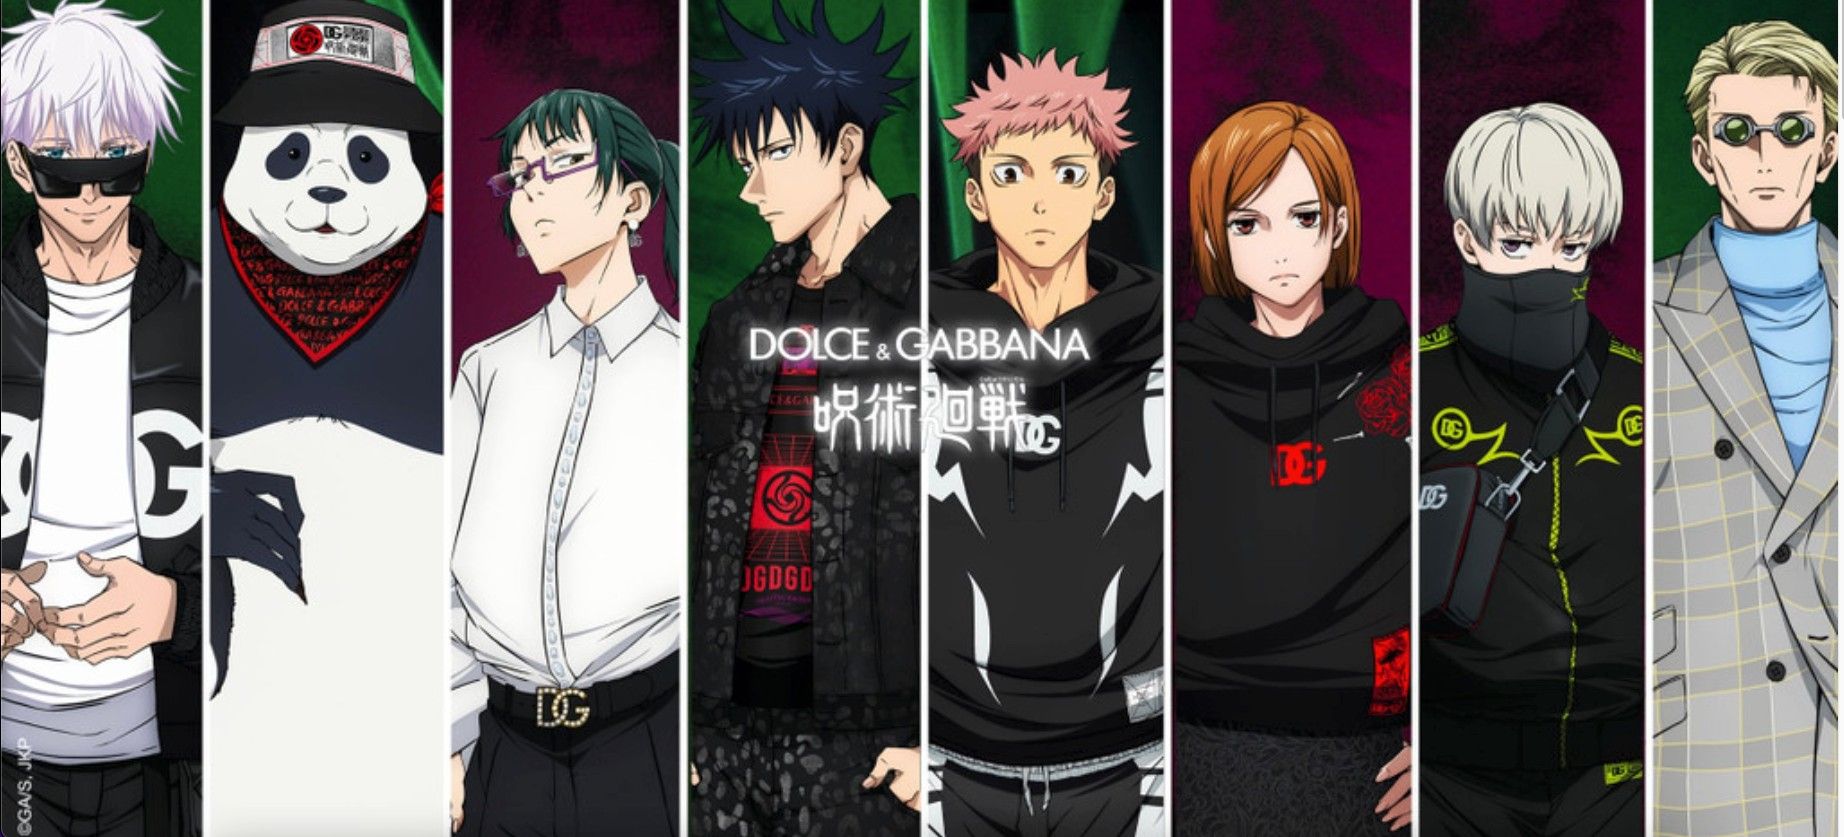 Jujutsu Kaisen and Dolce & Gabbana Collaborate for New Clothing Line